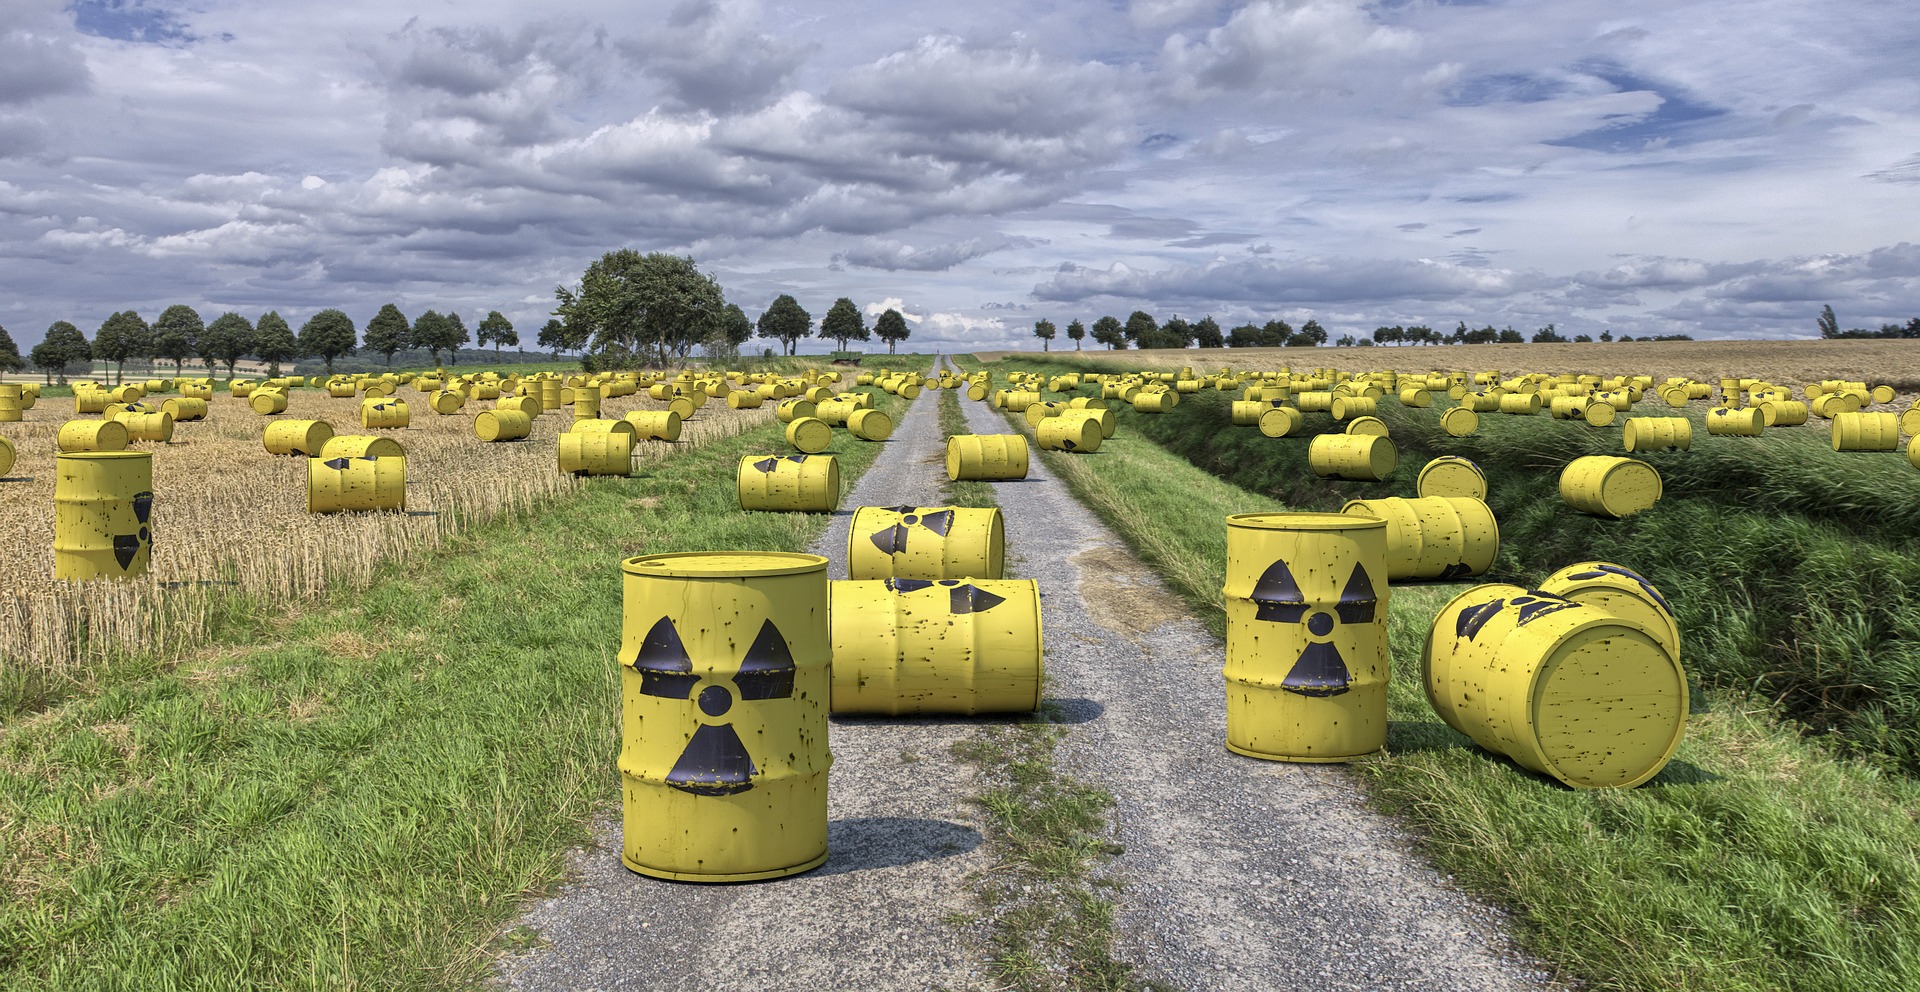 Nuclear waste lasts for hundreds of thousands of years